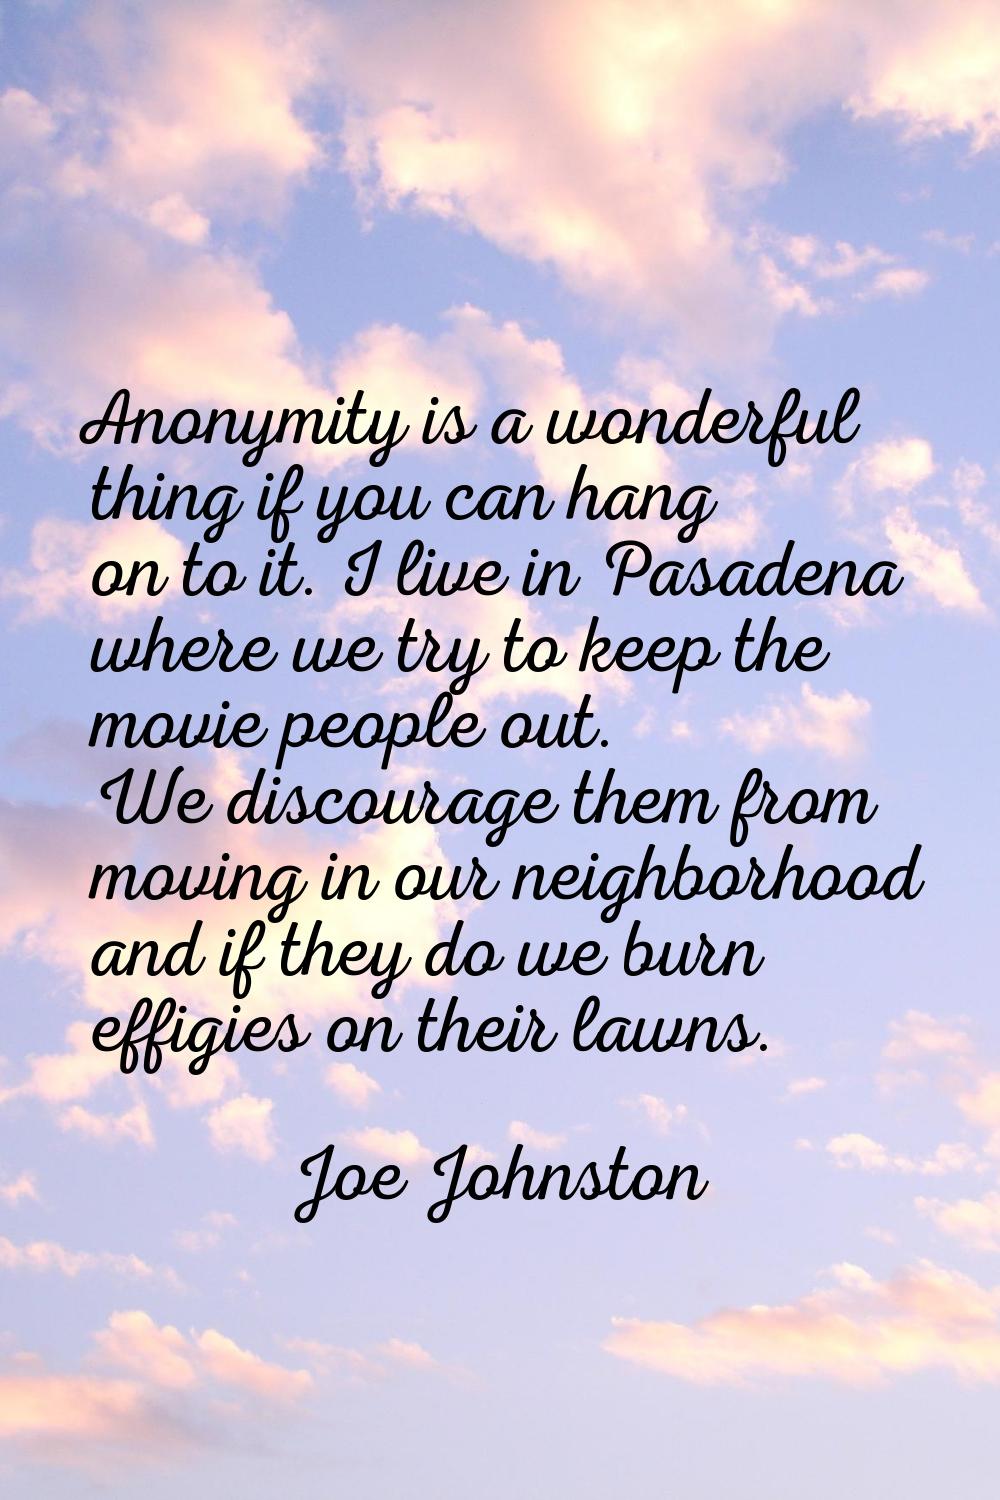 Anonymity is a wonderful thing if you can hang on to it. I live in Pasadena where we try to keep th